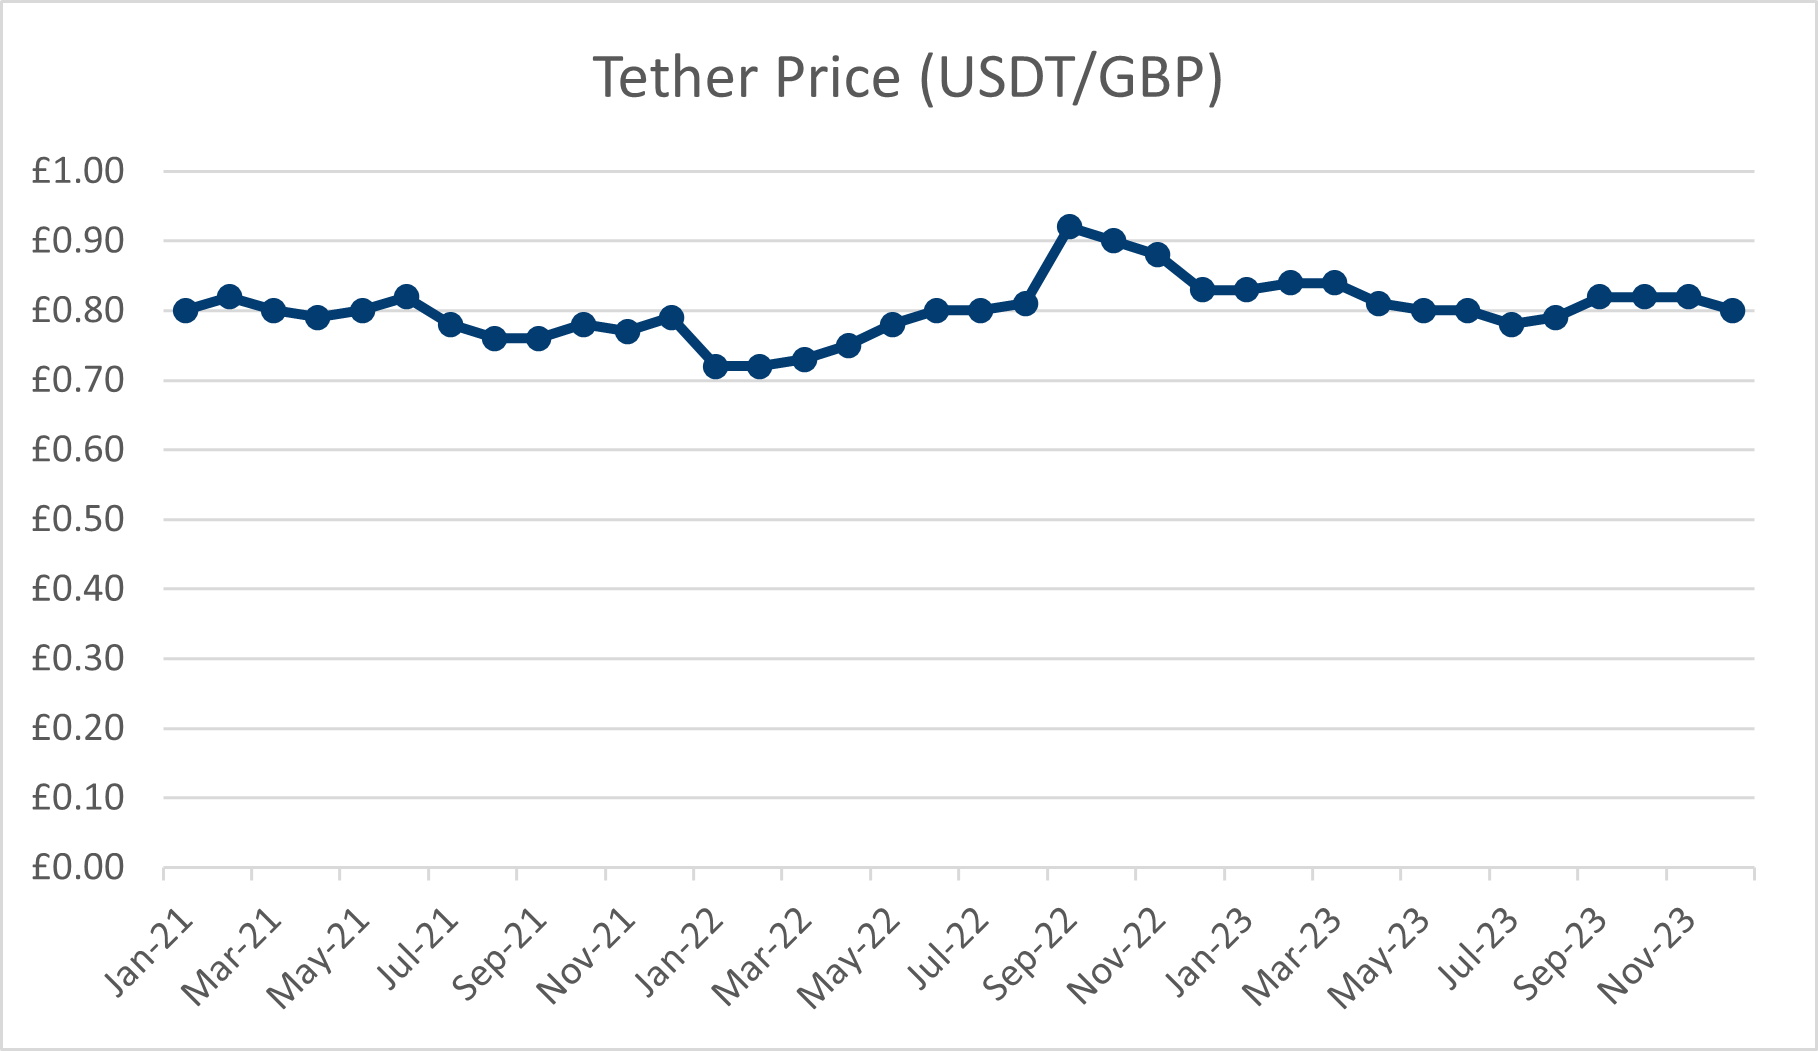 Tether price graph 2021-2023